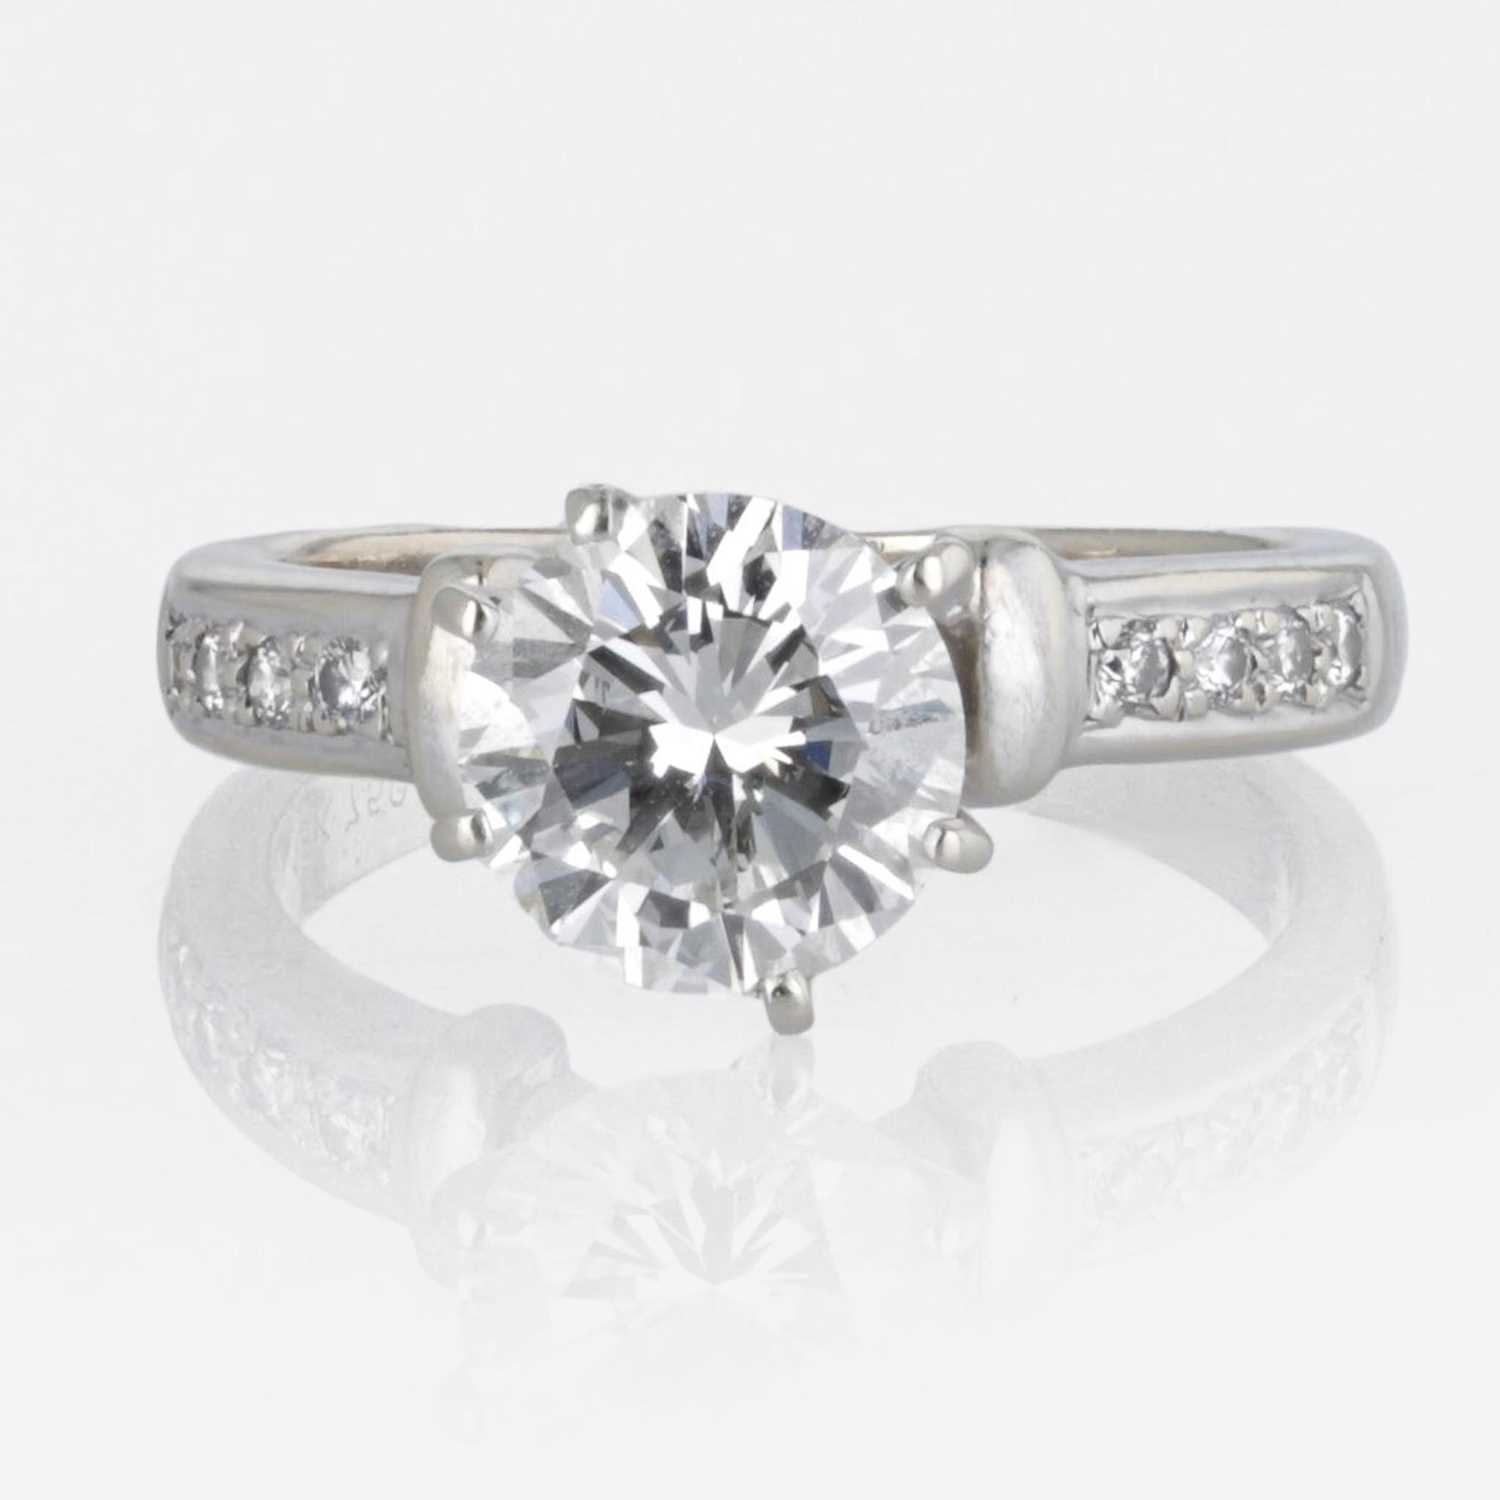 Lot 51 - An 18K White Gold 2.00 carat Ladies Diamond Ring with Accent Diamonds